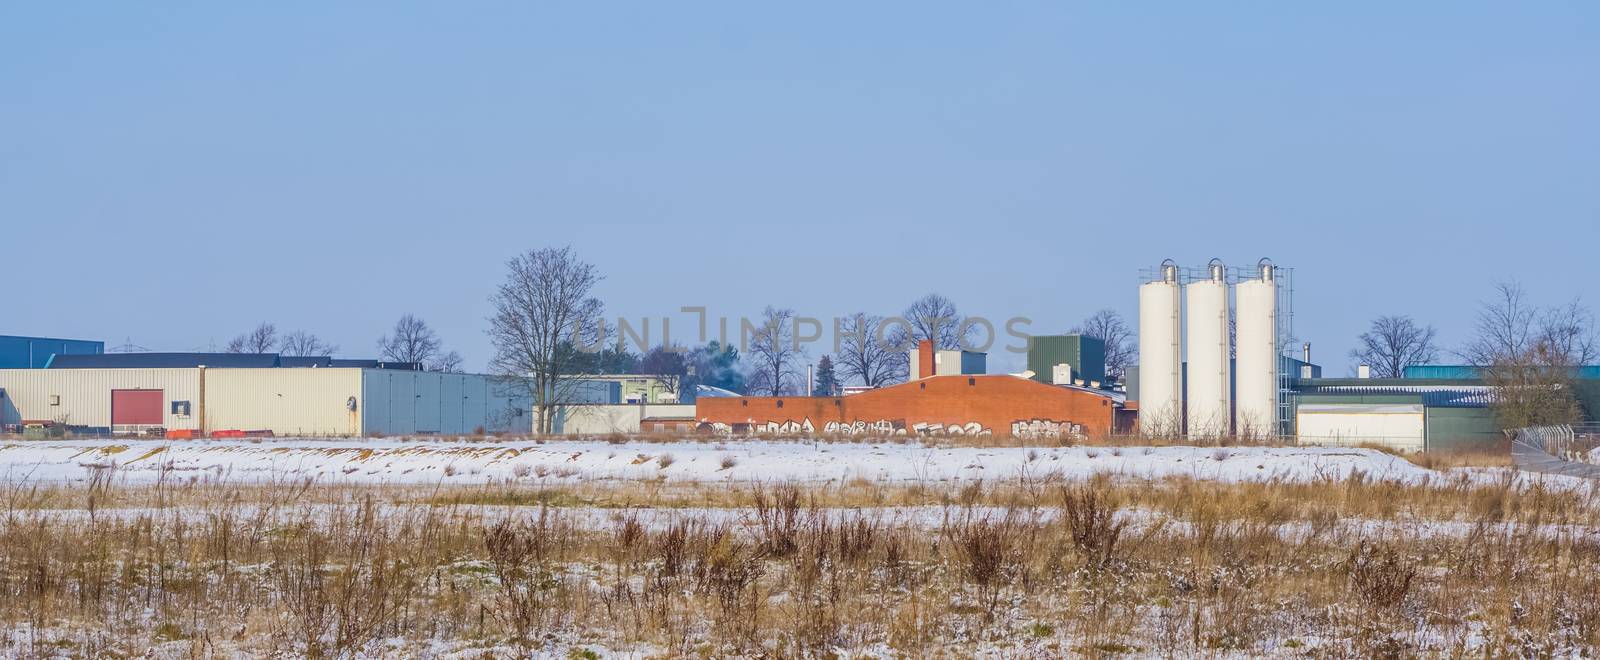 Dutch industry landscape with a warehouse and some white tanks, Majoppeveld a industrial terrain in the city of Roosendaal, The Netherlands by charlottebleijenberg